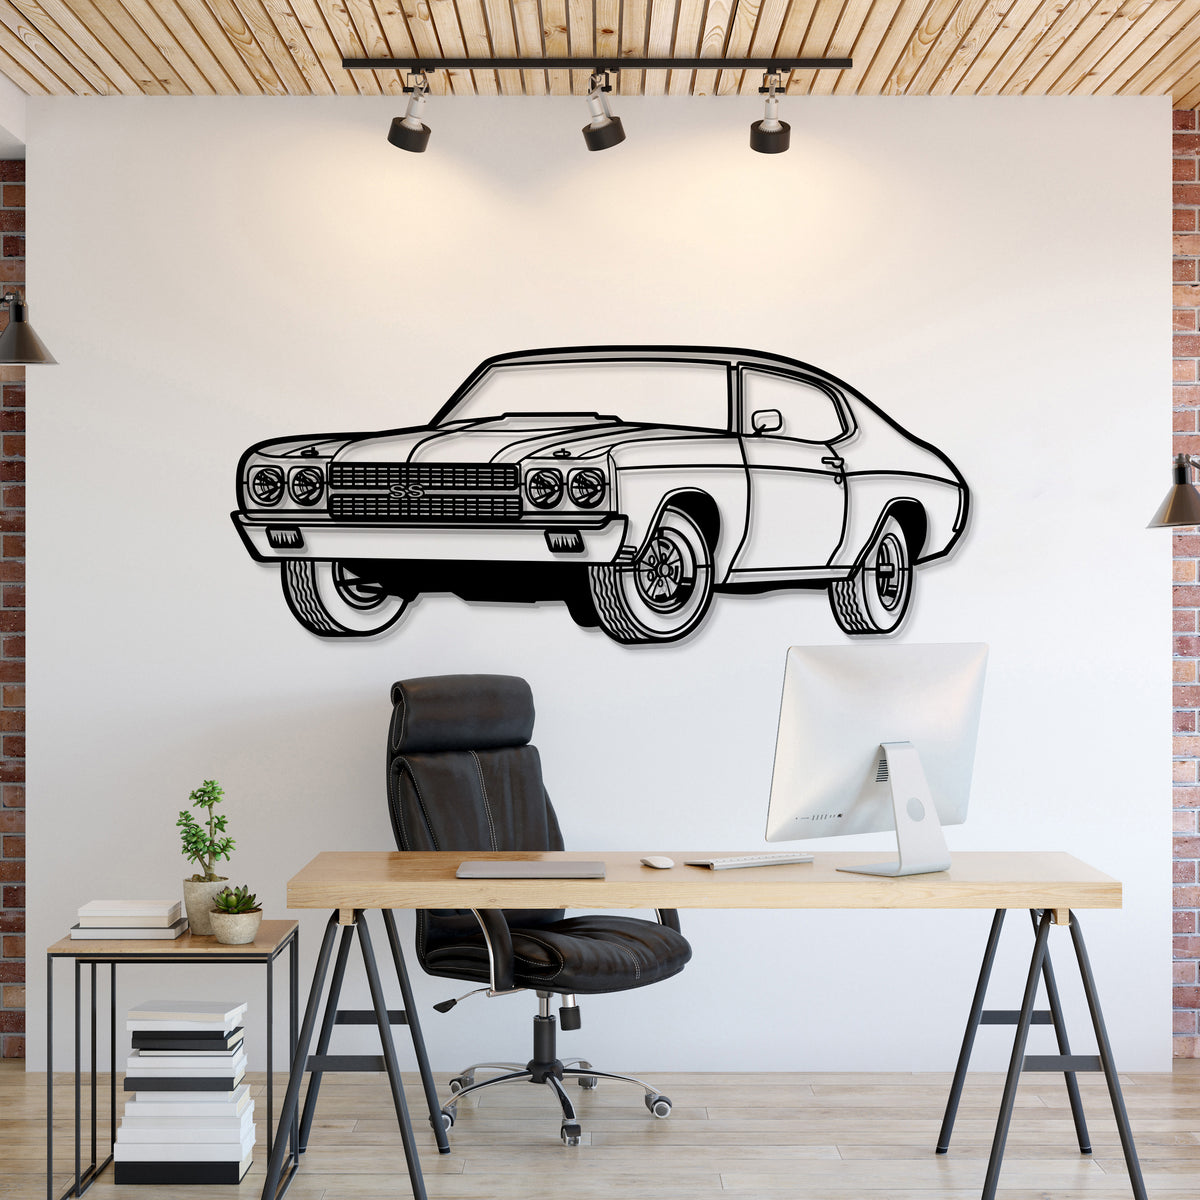 1970 Chevelle SS Perspective Metal Car Wall Art - MT1251